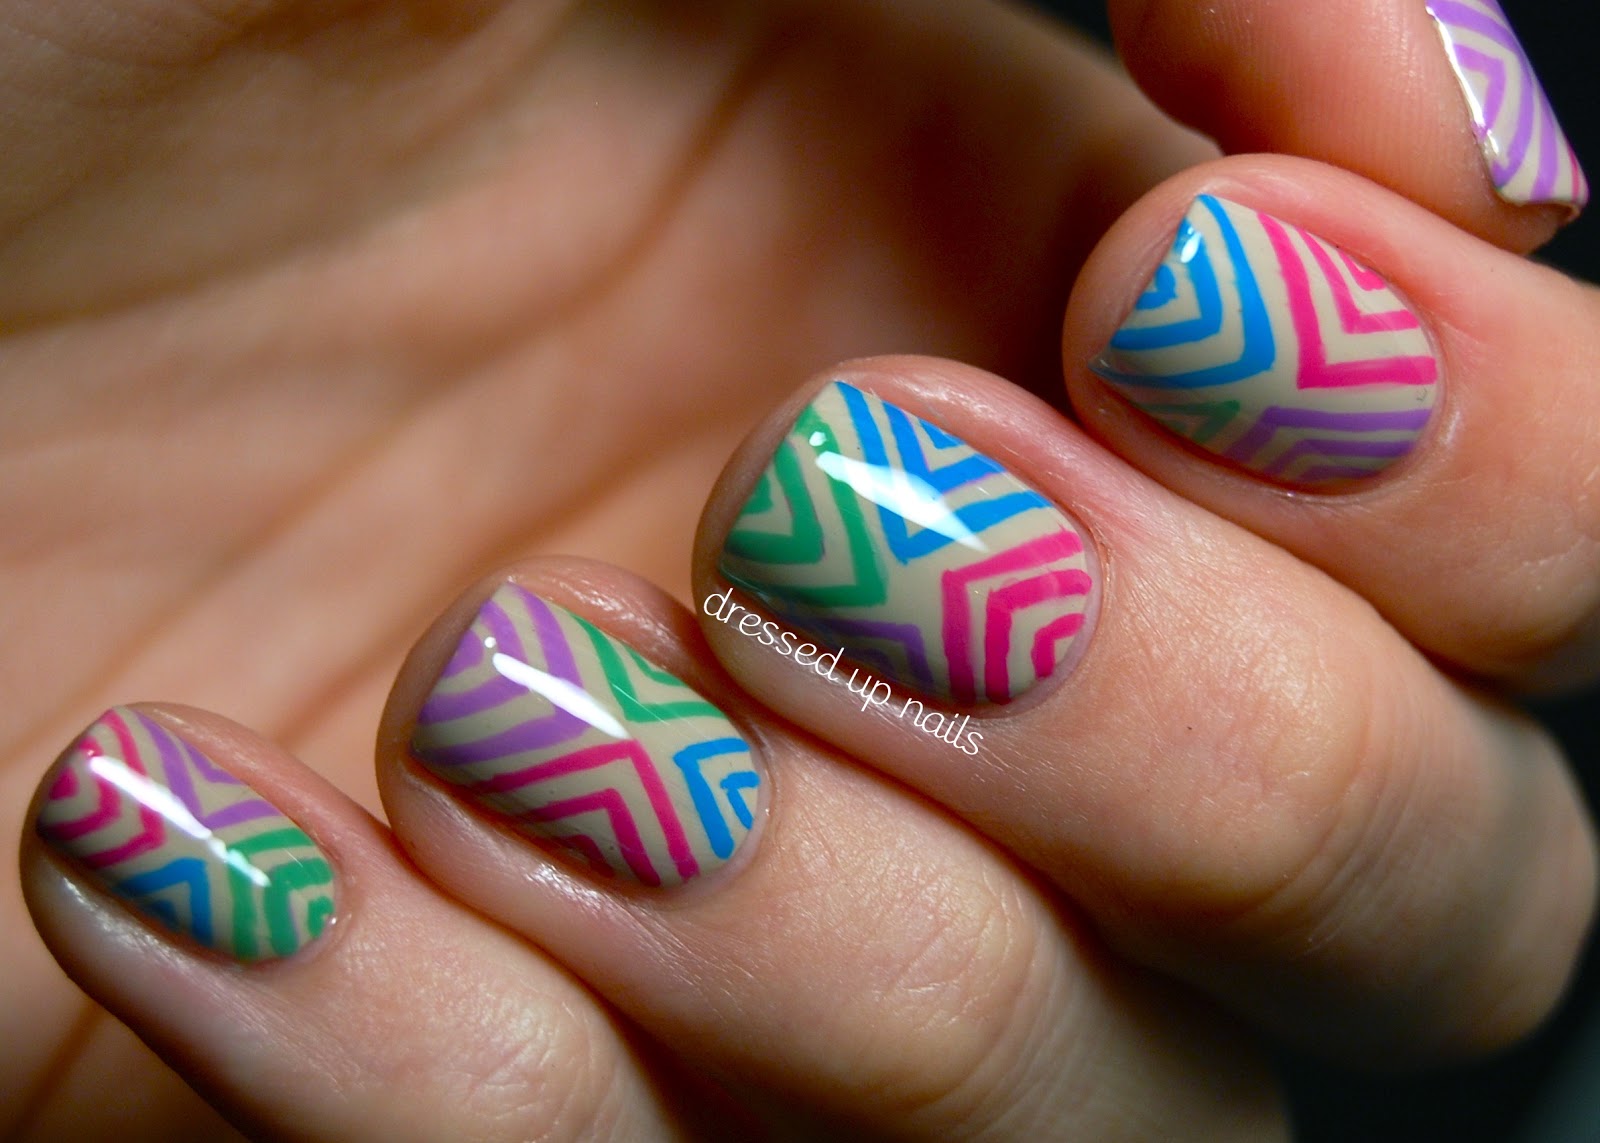 6. Chevron Nail Art Without Striping Tape - wide 3